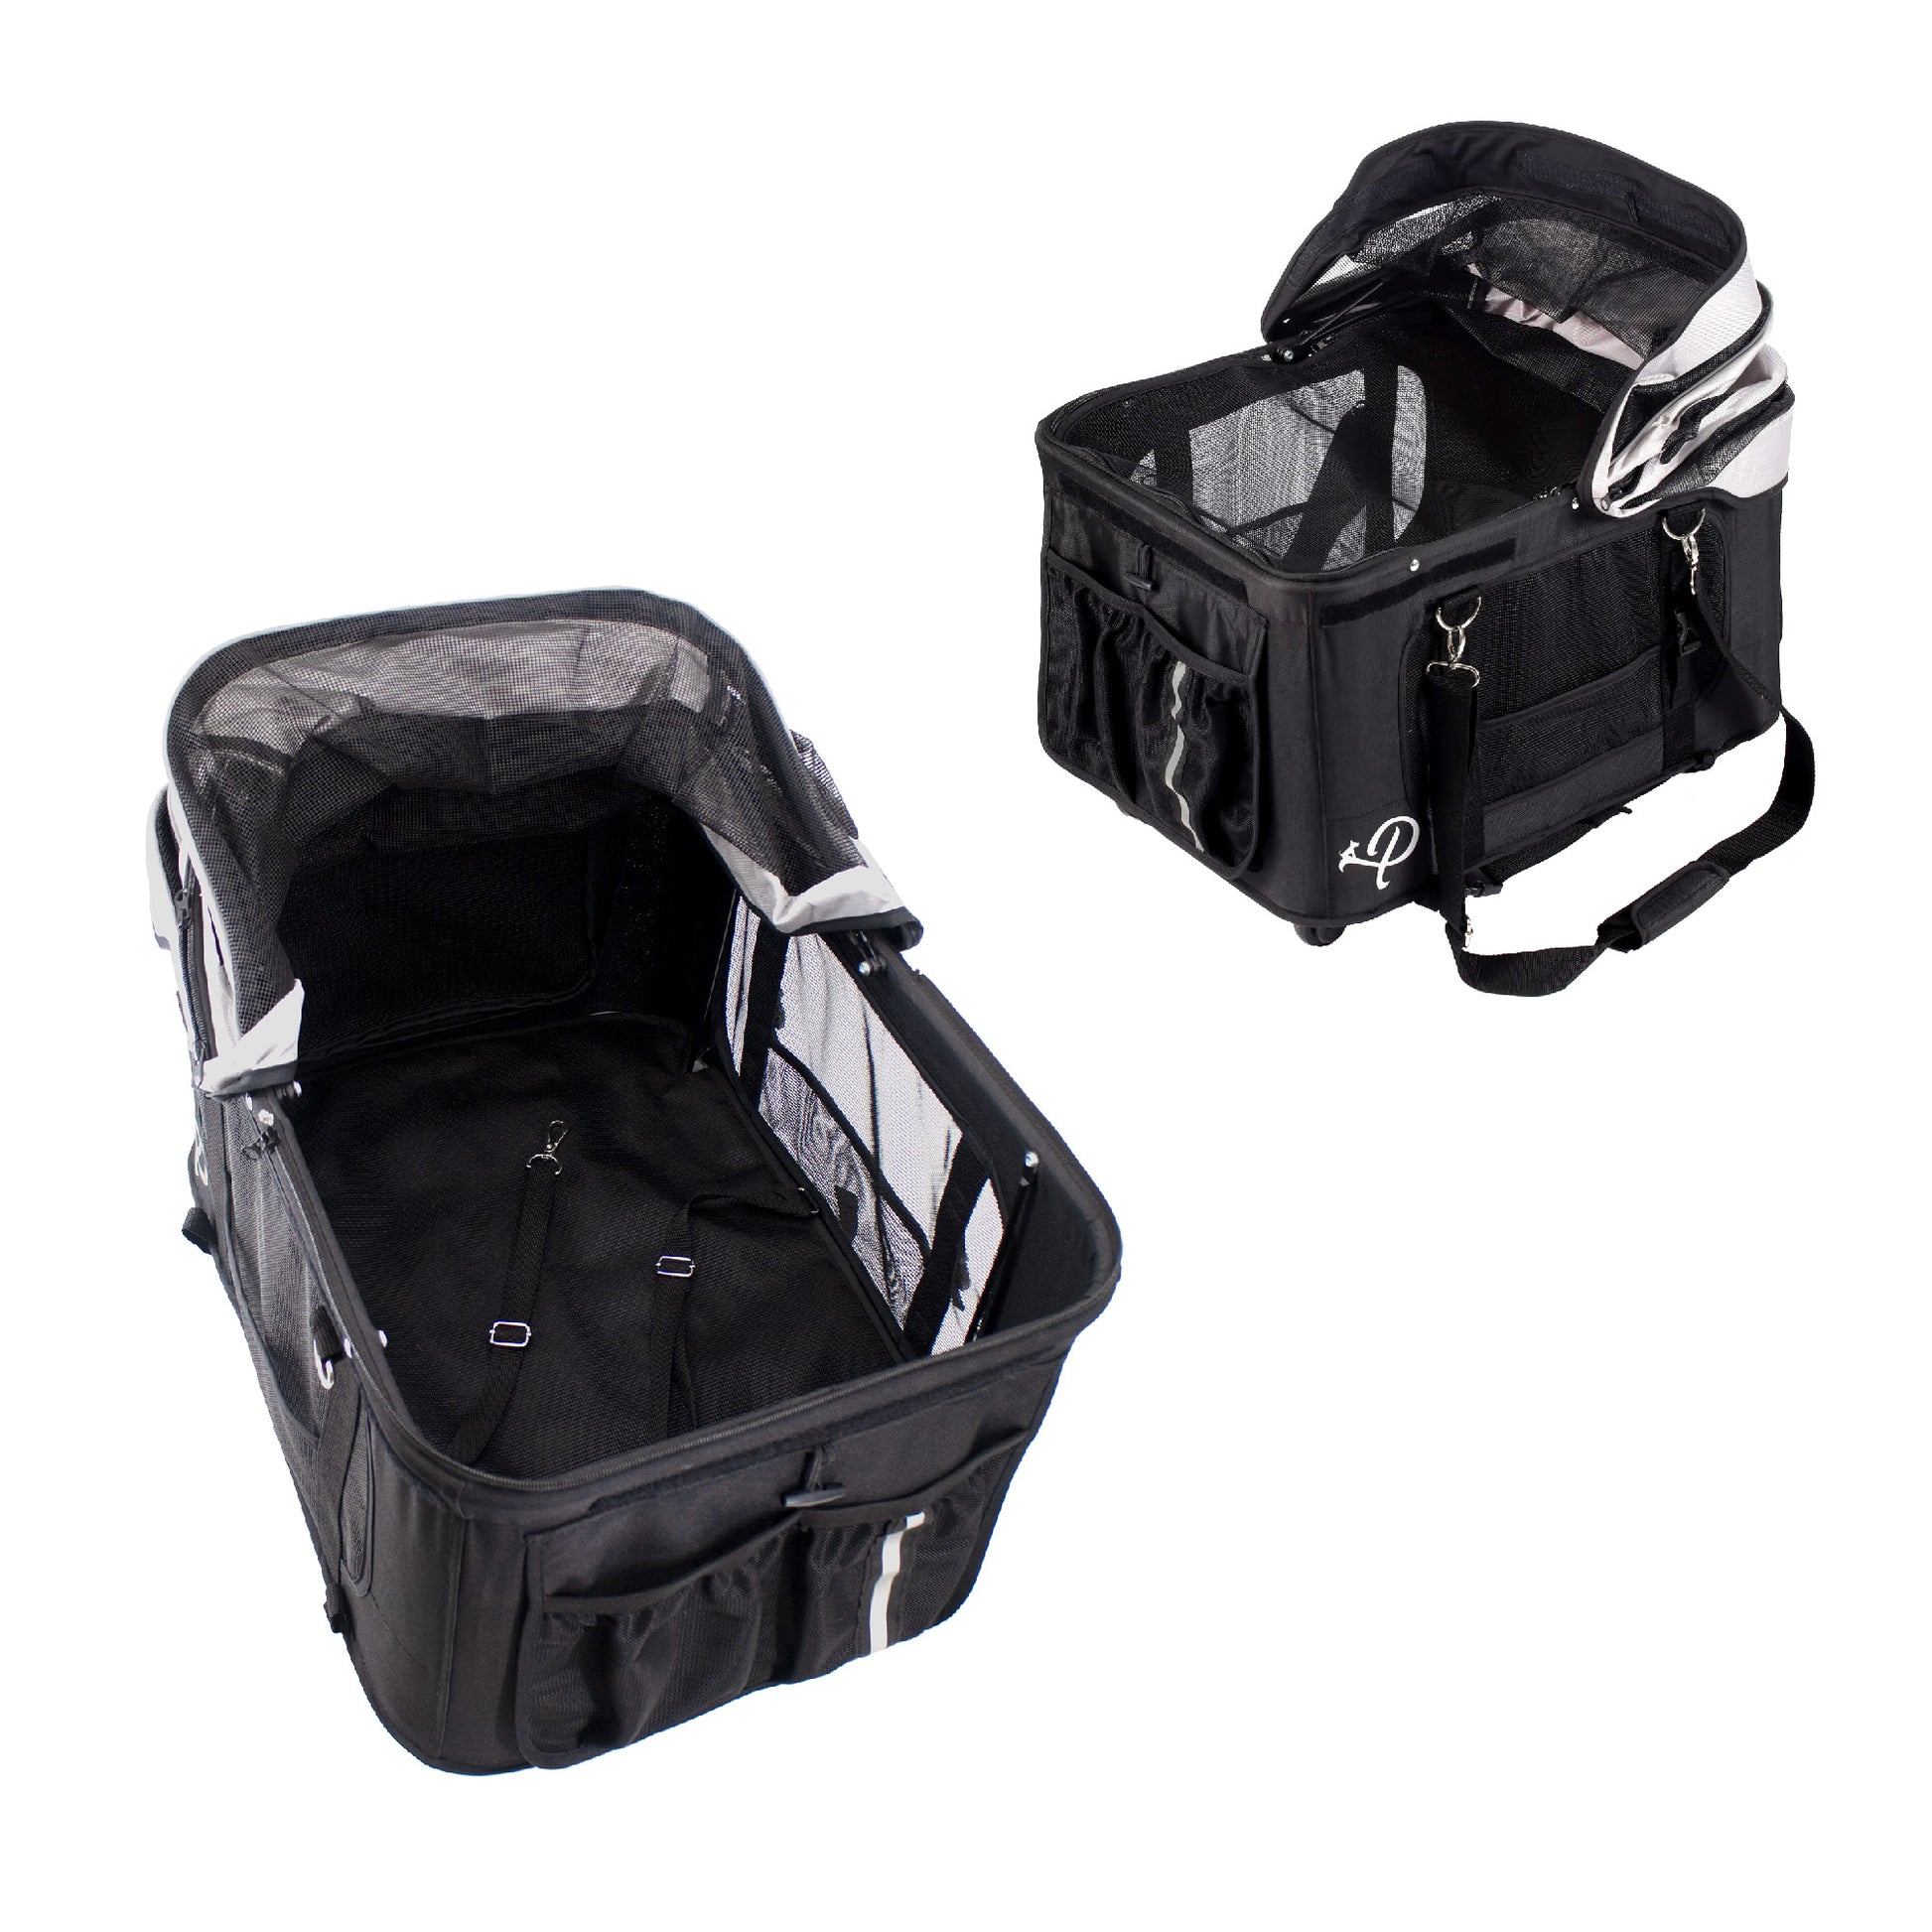 pet carrier and car seat